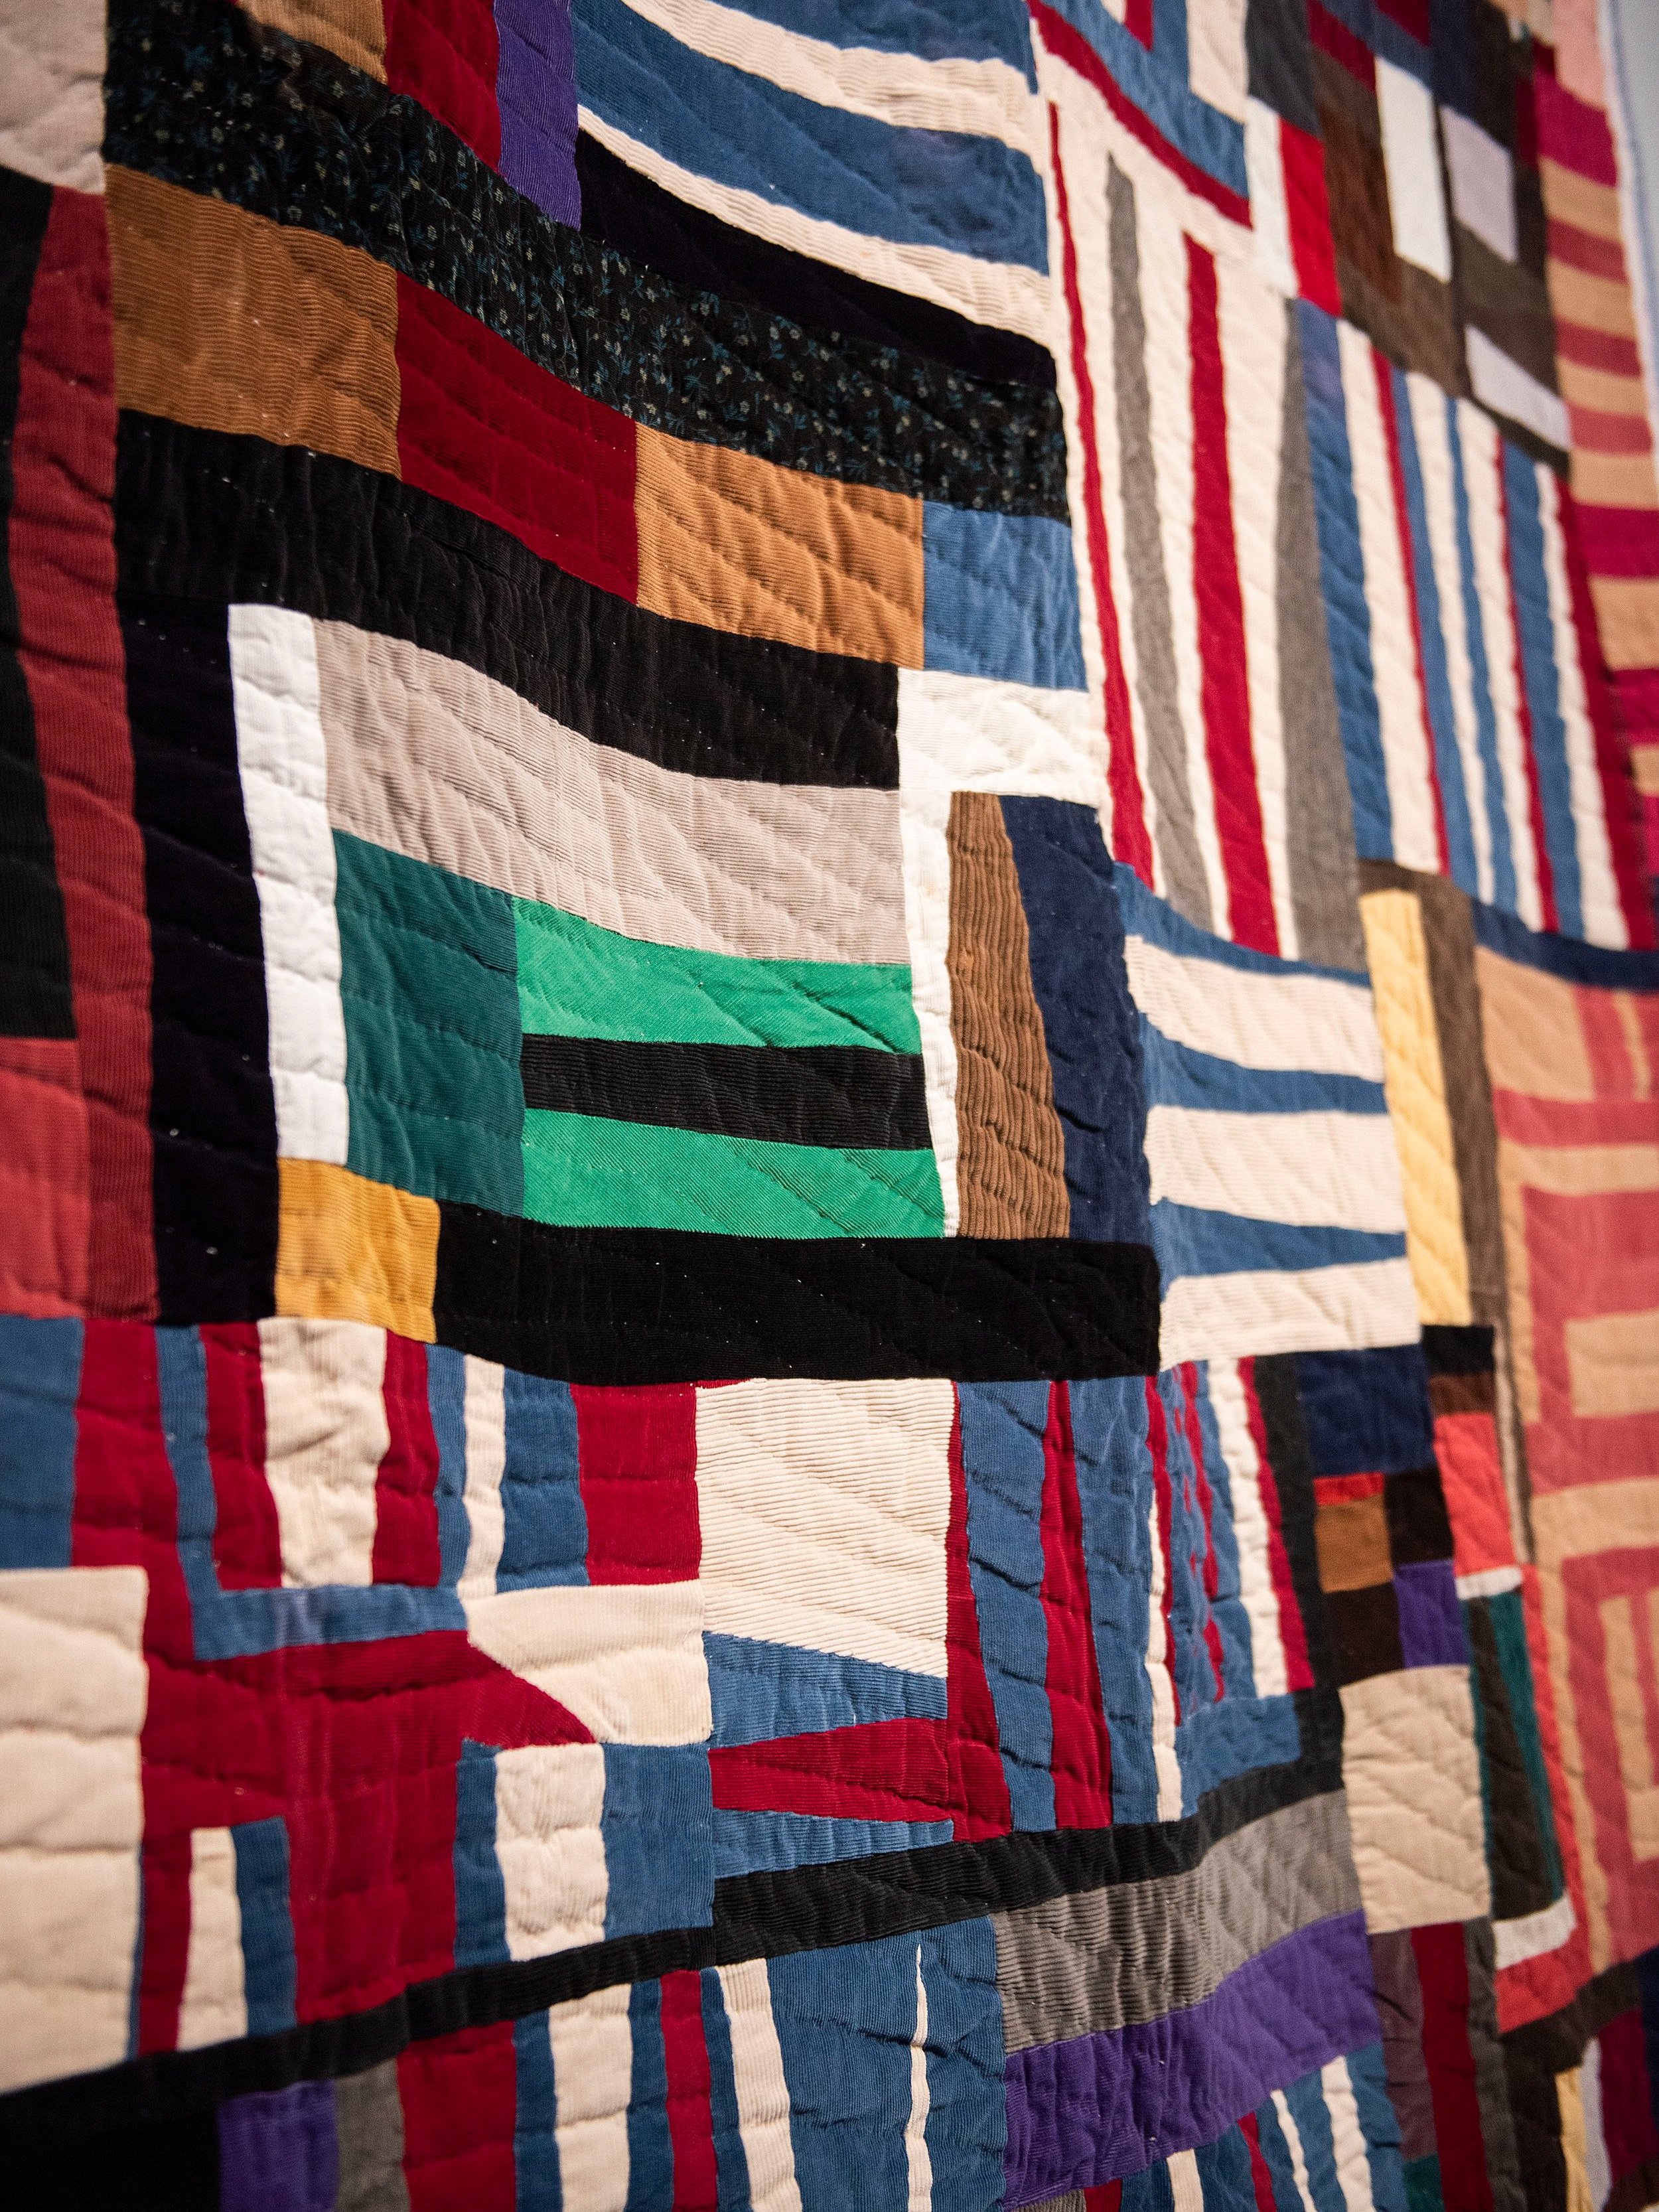   (detail):  Mary Lee Bendolph (American, b. 1935), Untitled (Strip Quilt), 2009, cotton, corduroy, velvet, Purchased with funds from the Reilly Initiative for Underrepresented Artists, LSUMOA 2021.10 